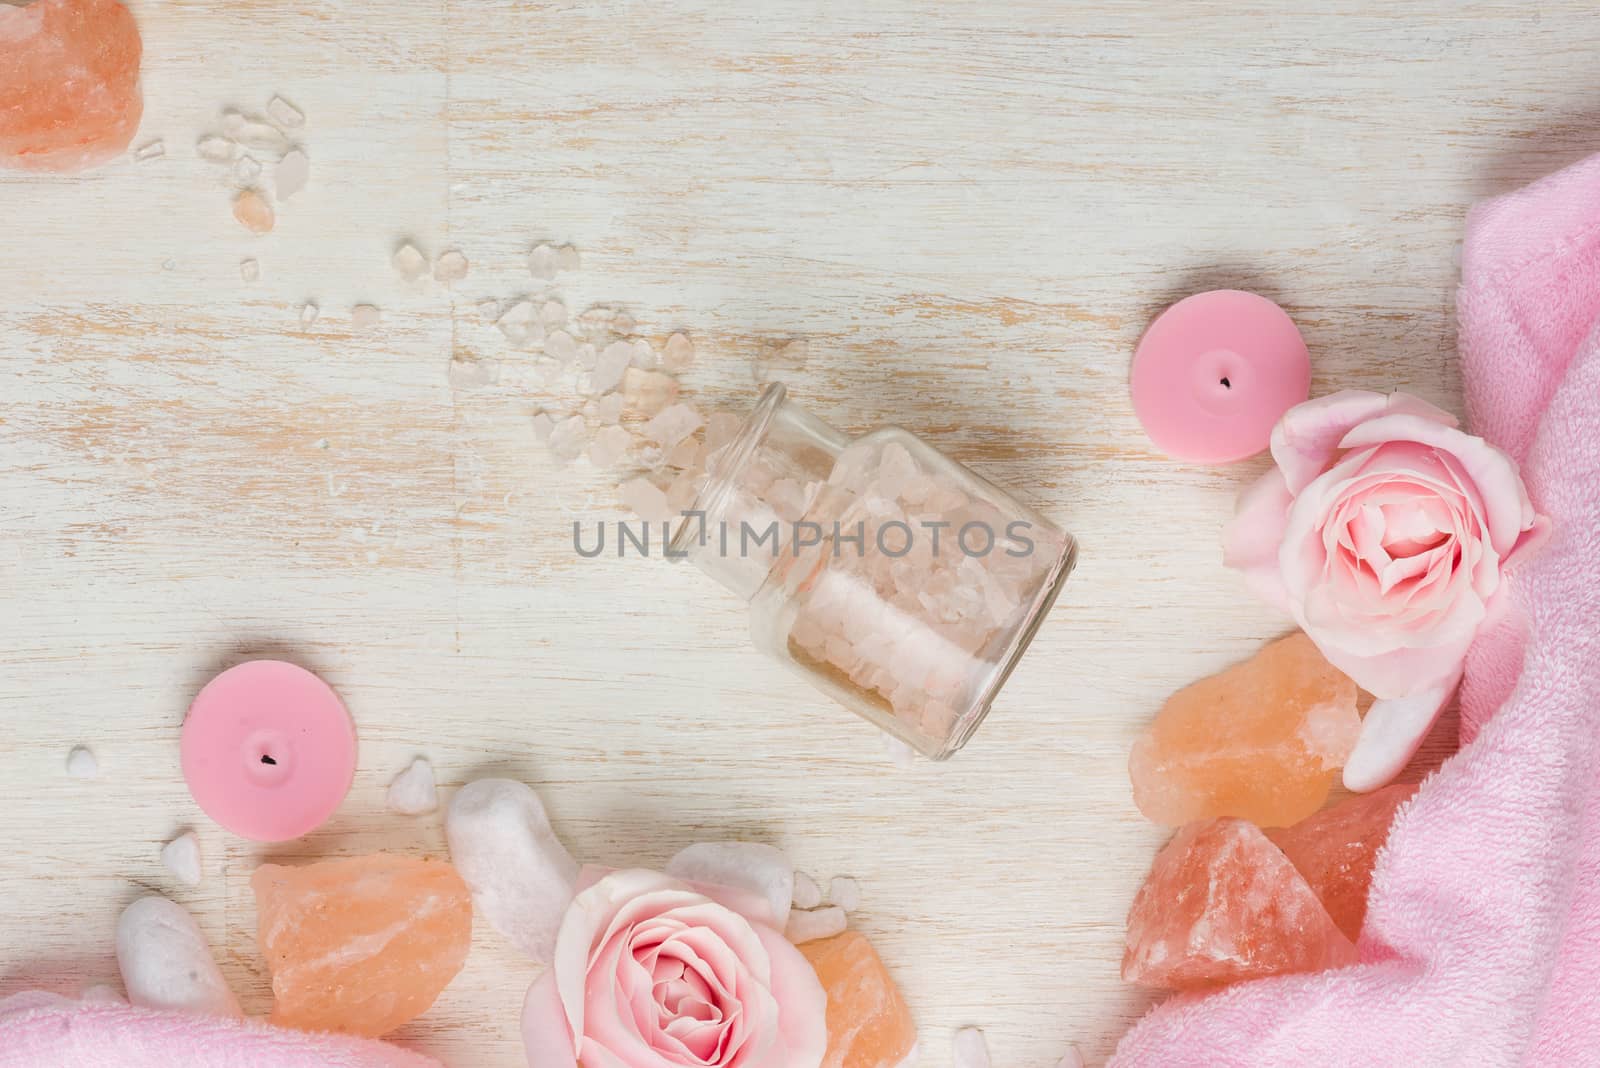 Spa settings with roses. Various items used in spa treatments on white wooden background.